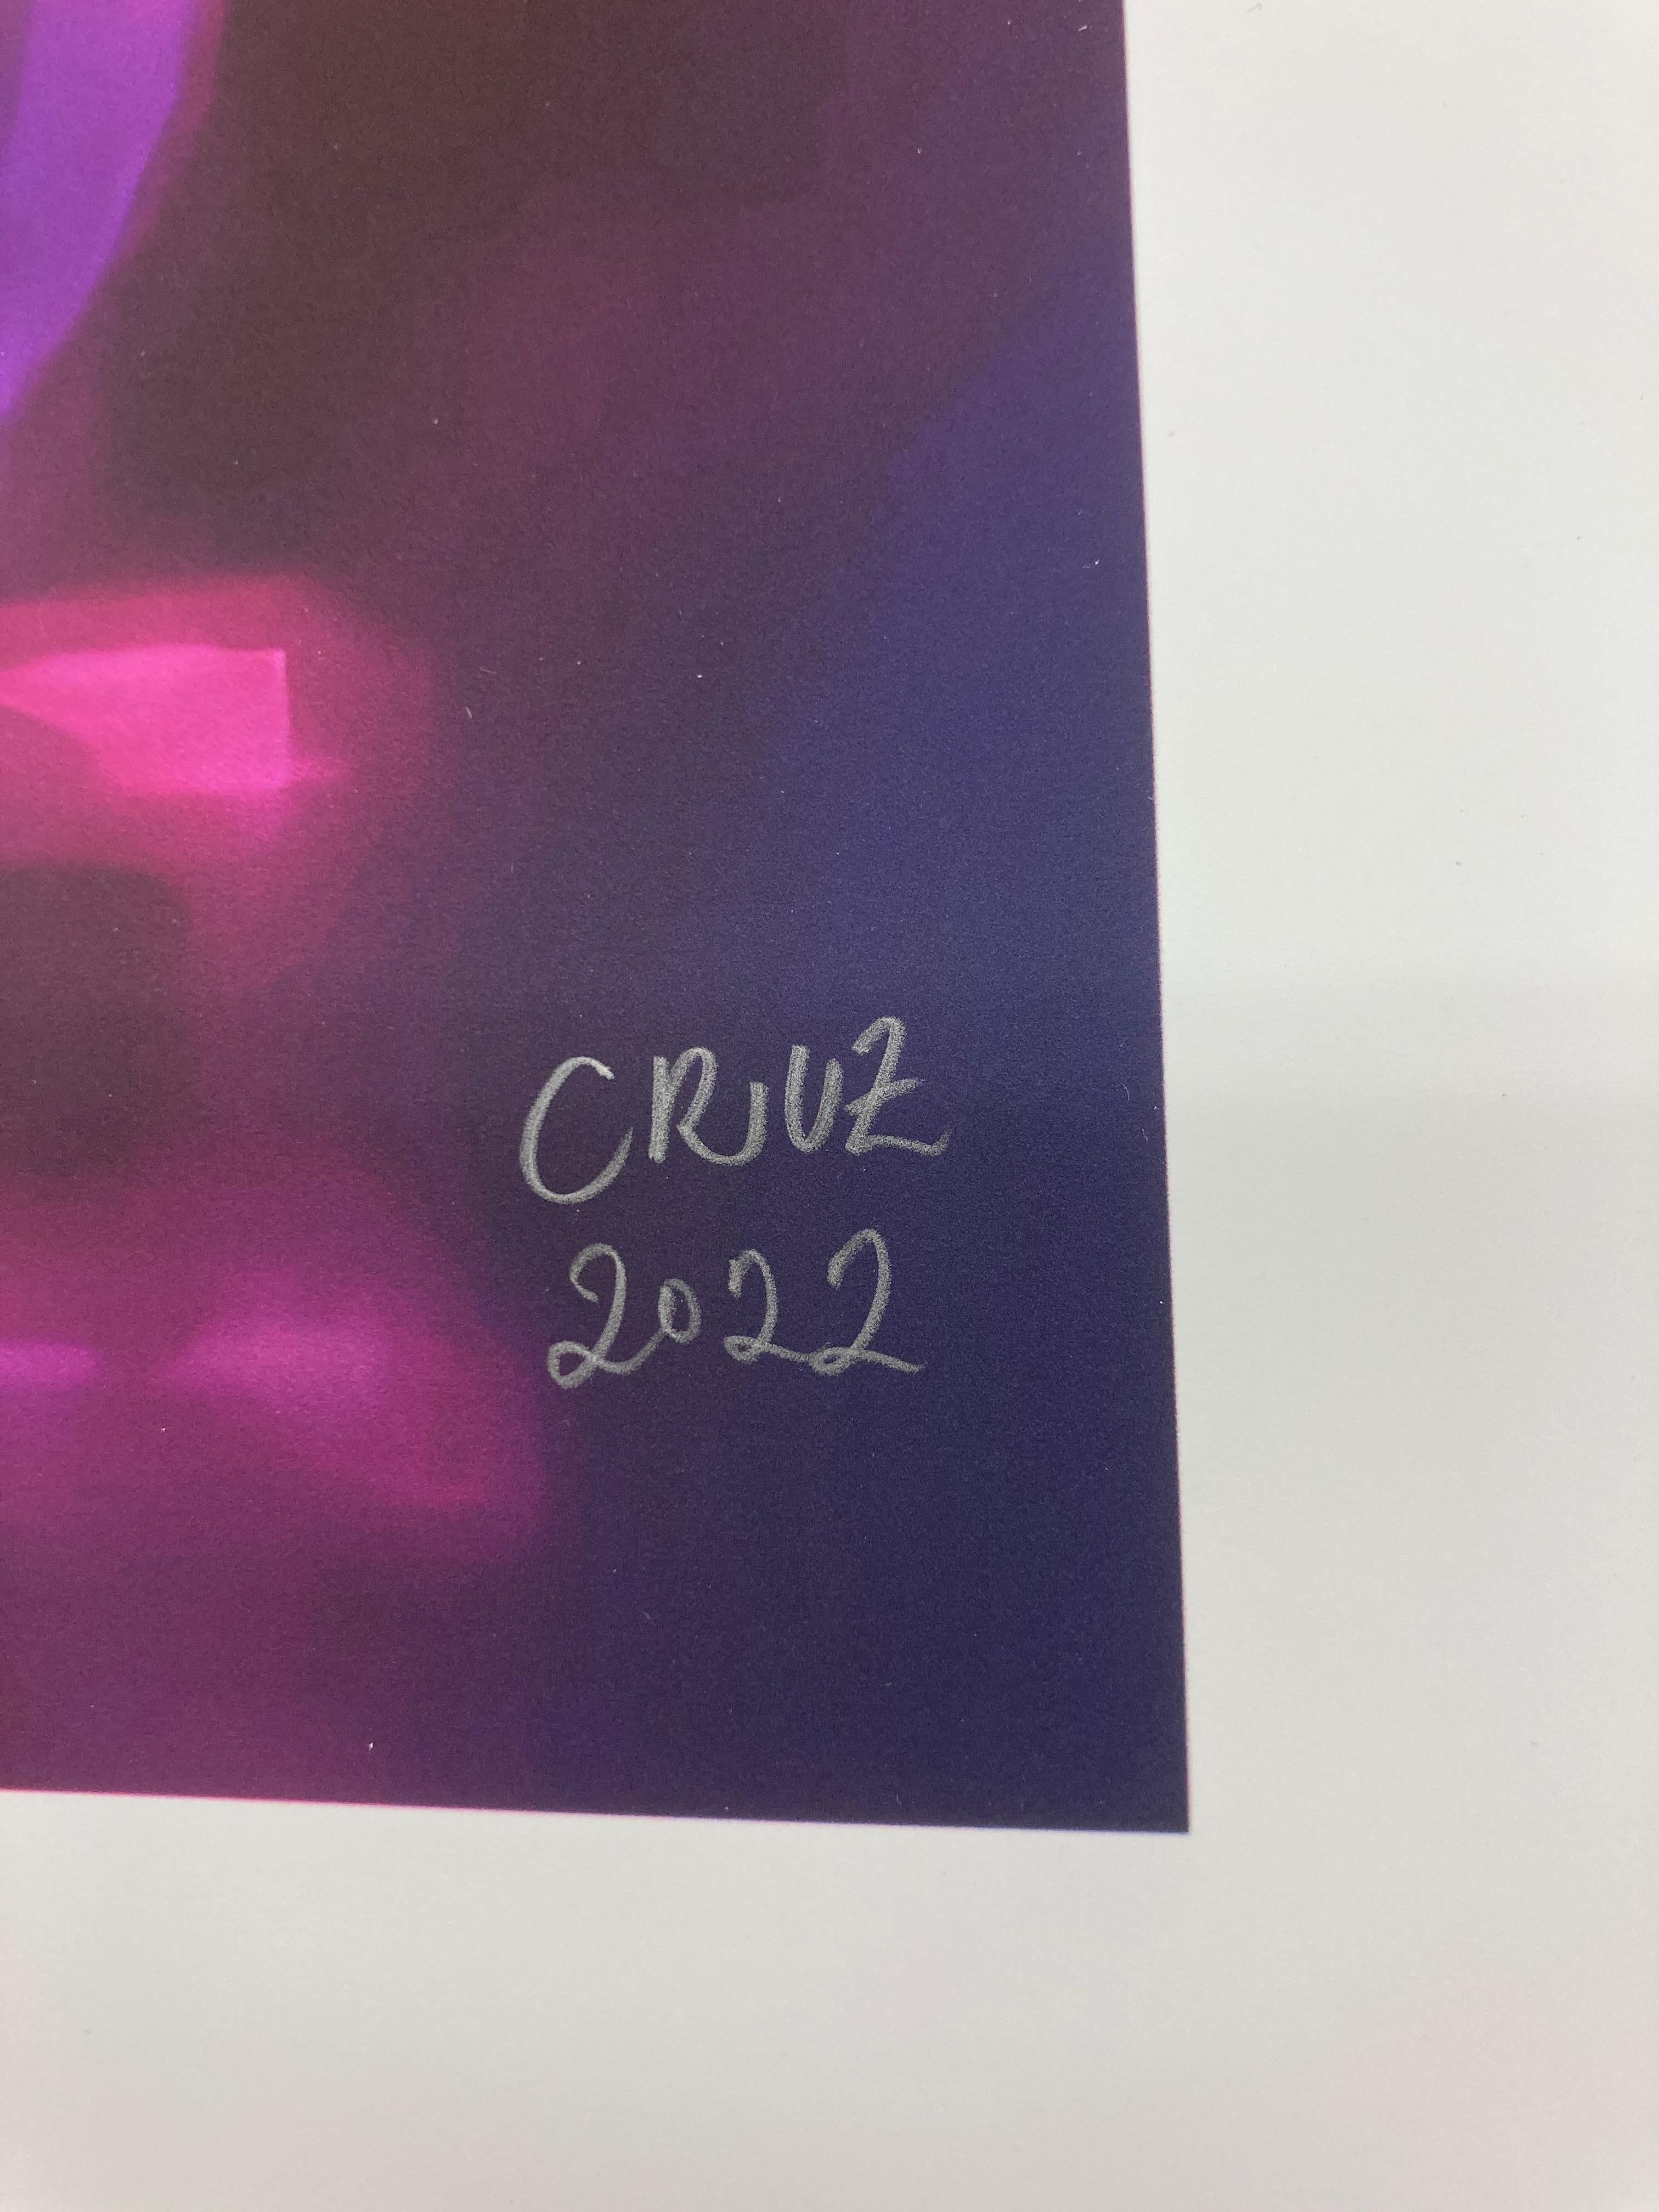 Pupil #5, 2022, digitally made print, edition of 3, signed - Gray Abstract Photograph by Gary Cruz